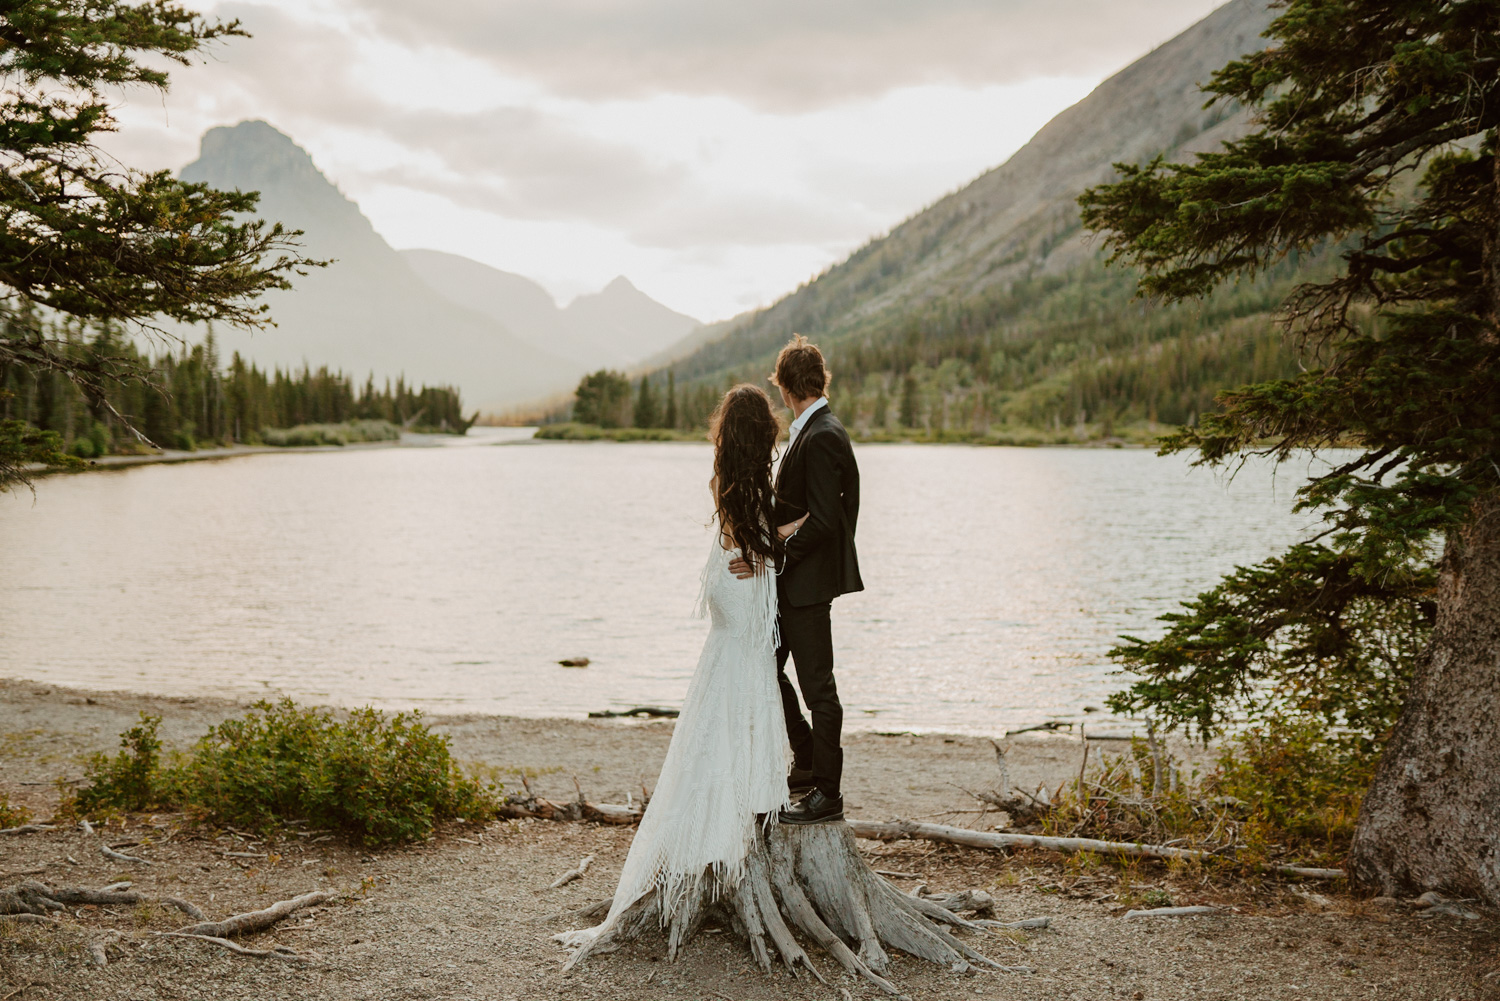 A couple during their elopement day in the Two Medicine area of Glacier National Park.